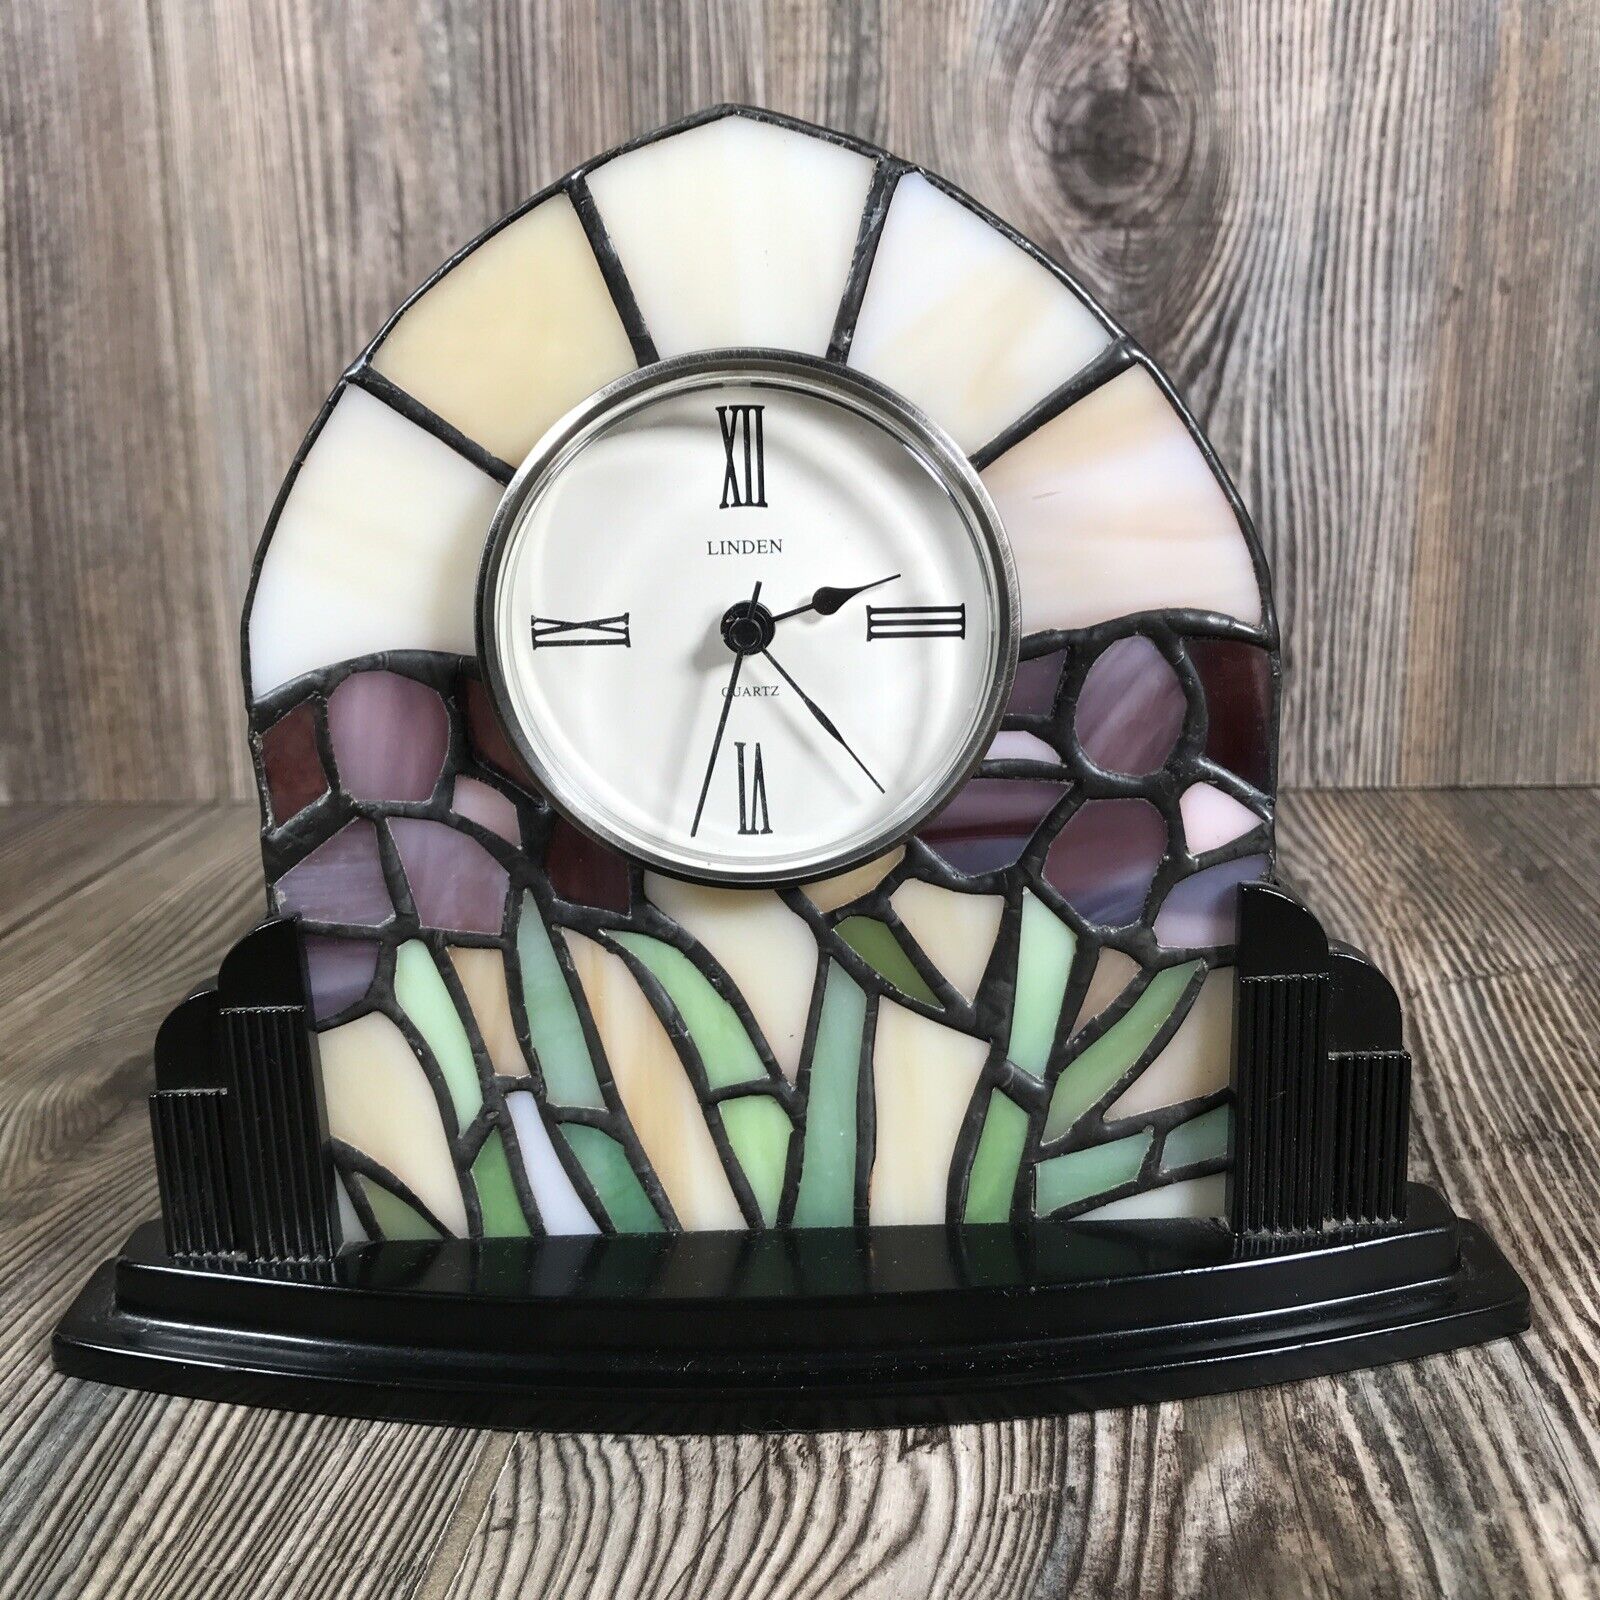 Linden Iris Quartz Clock Tiffany Style Genuine Stained Glass Vtg Tested Works